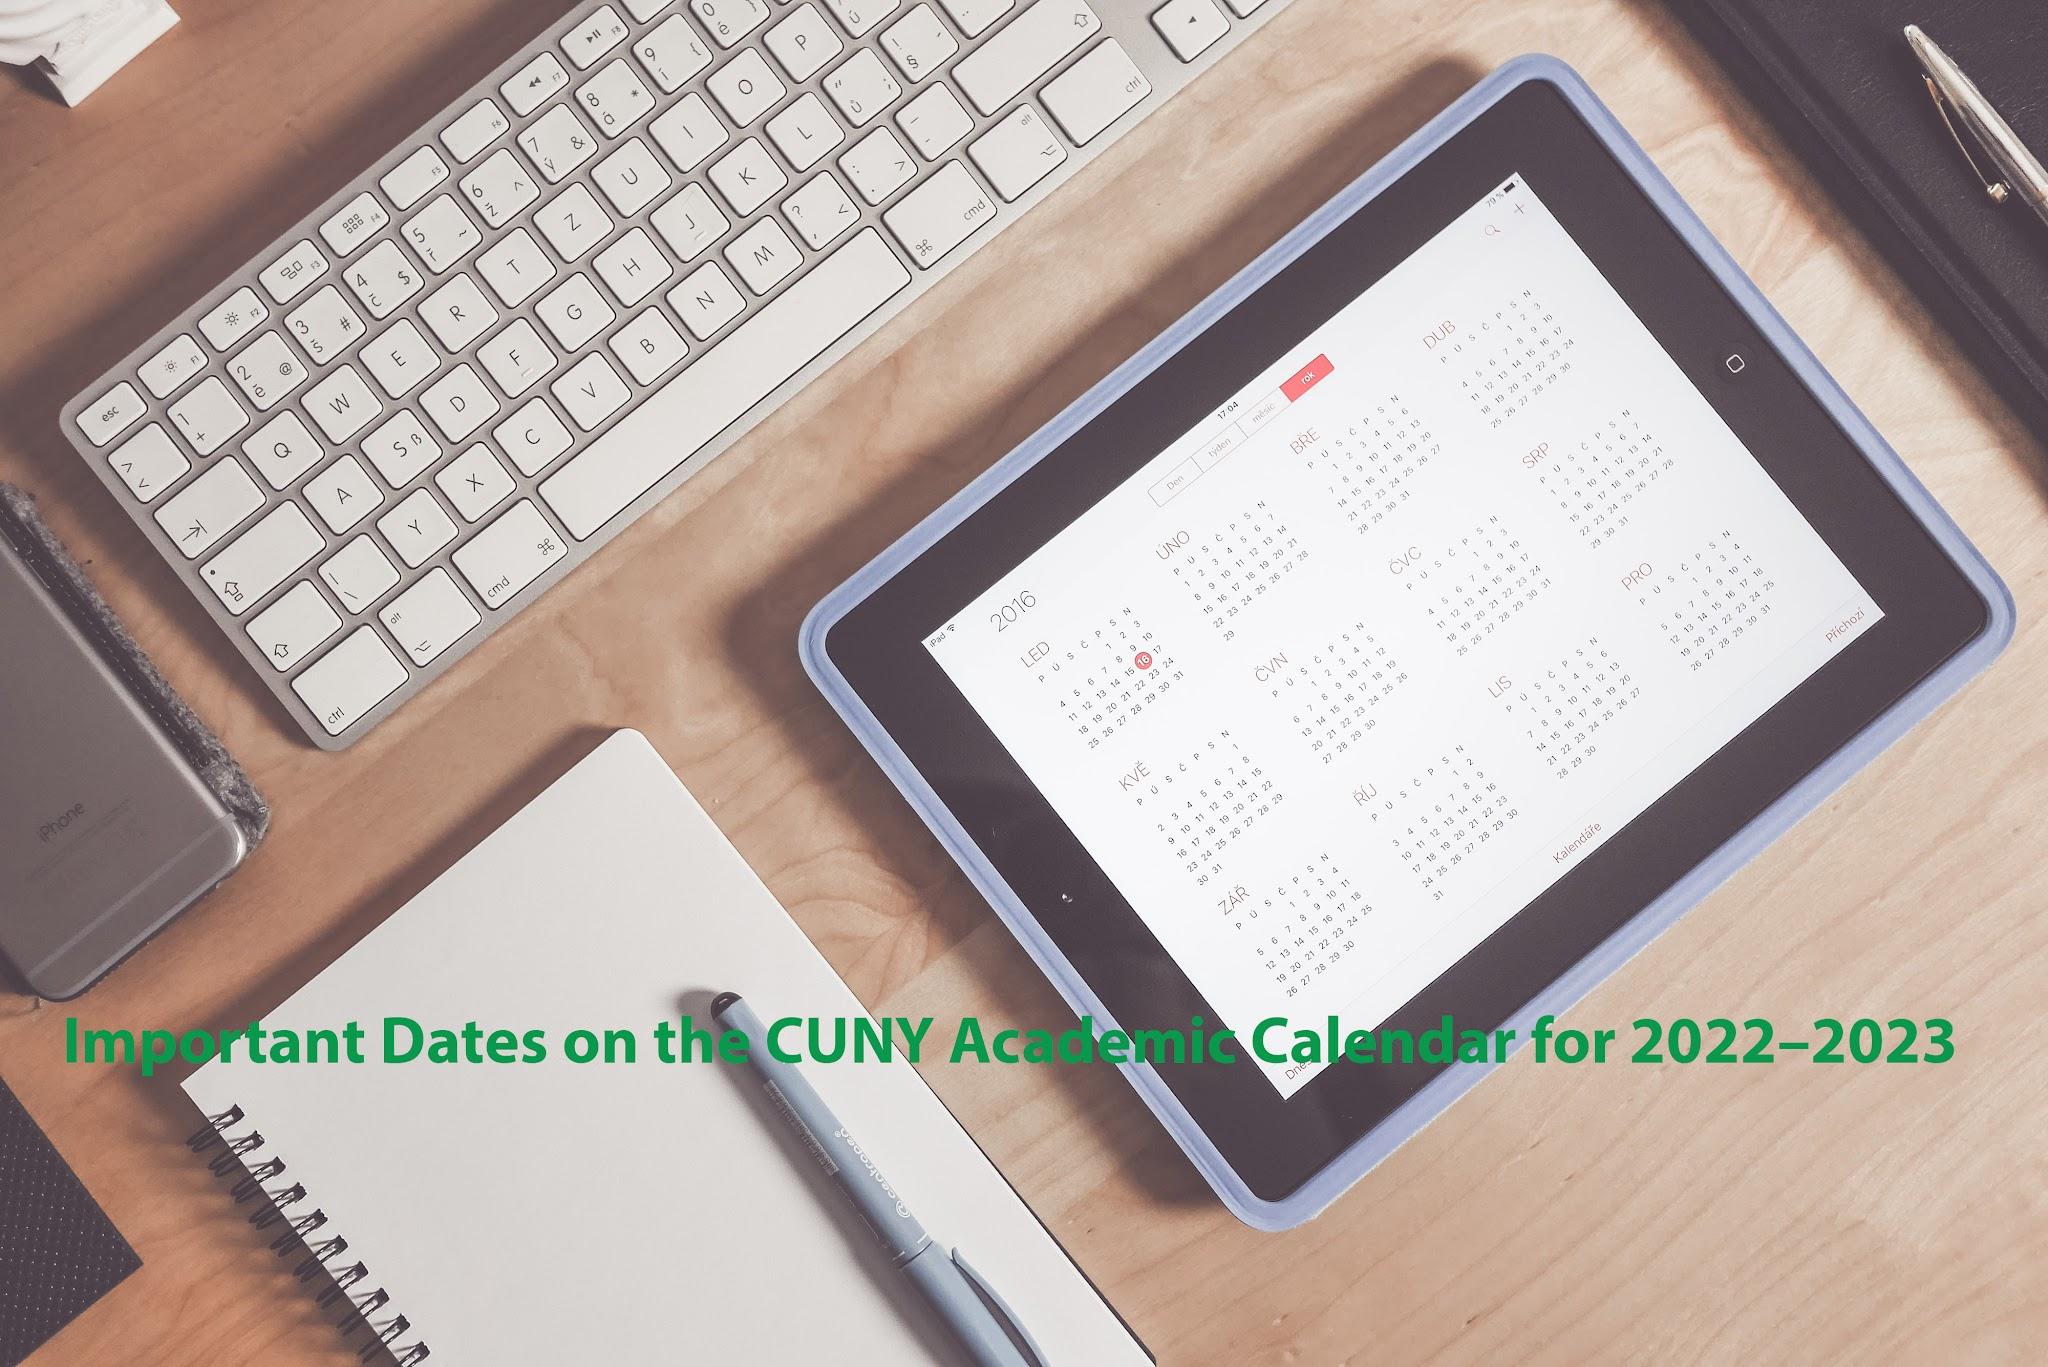 Important Dates on the CUNY Academic Calendar for 20222023